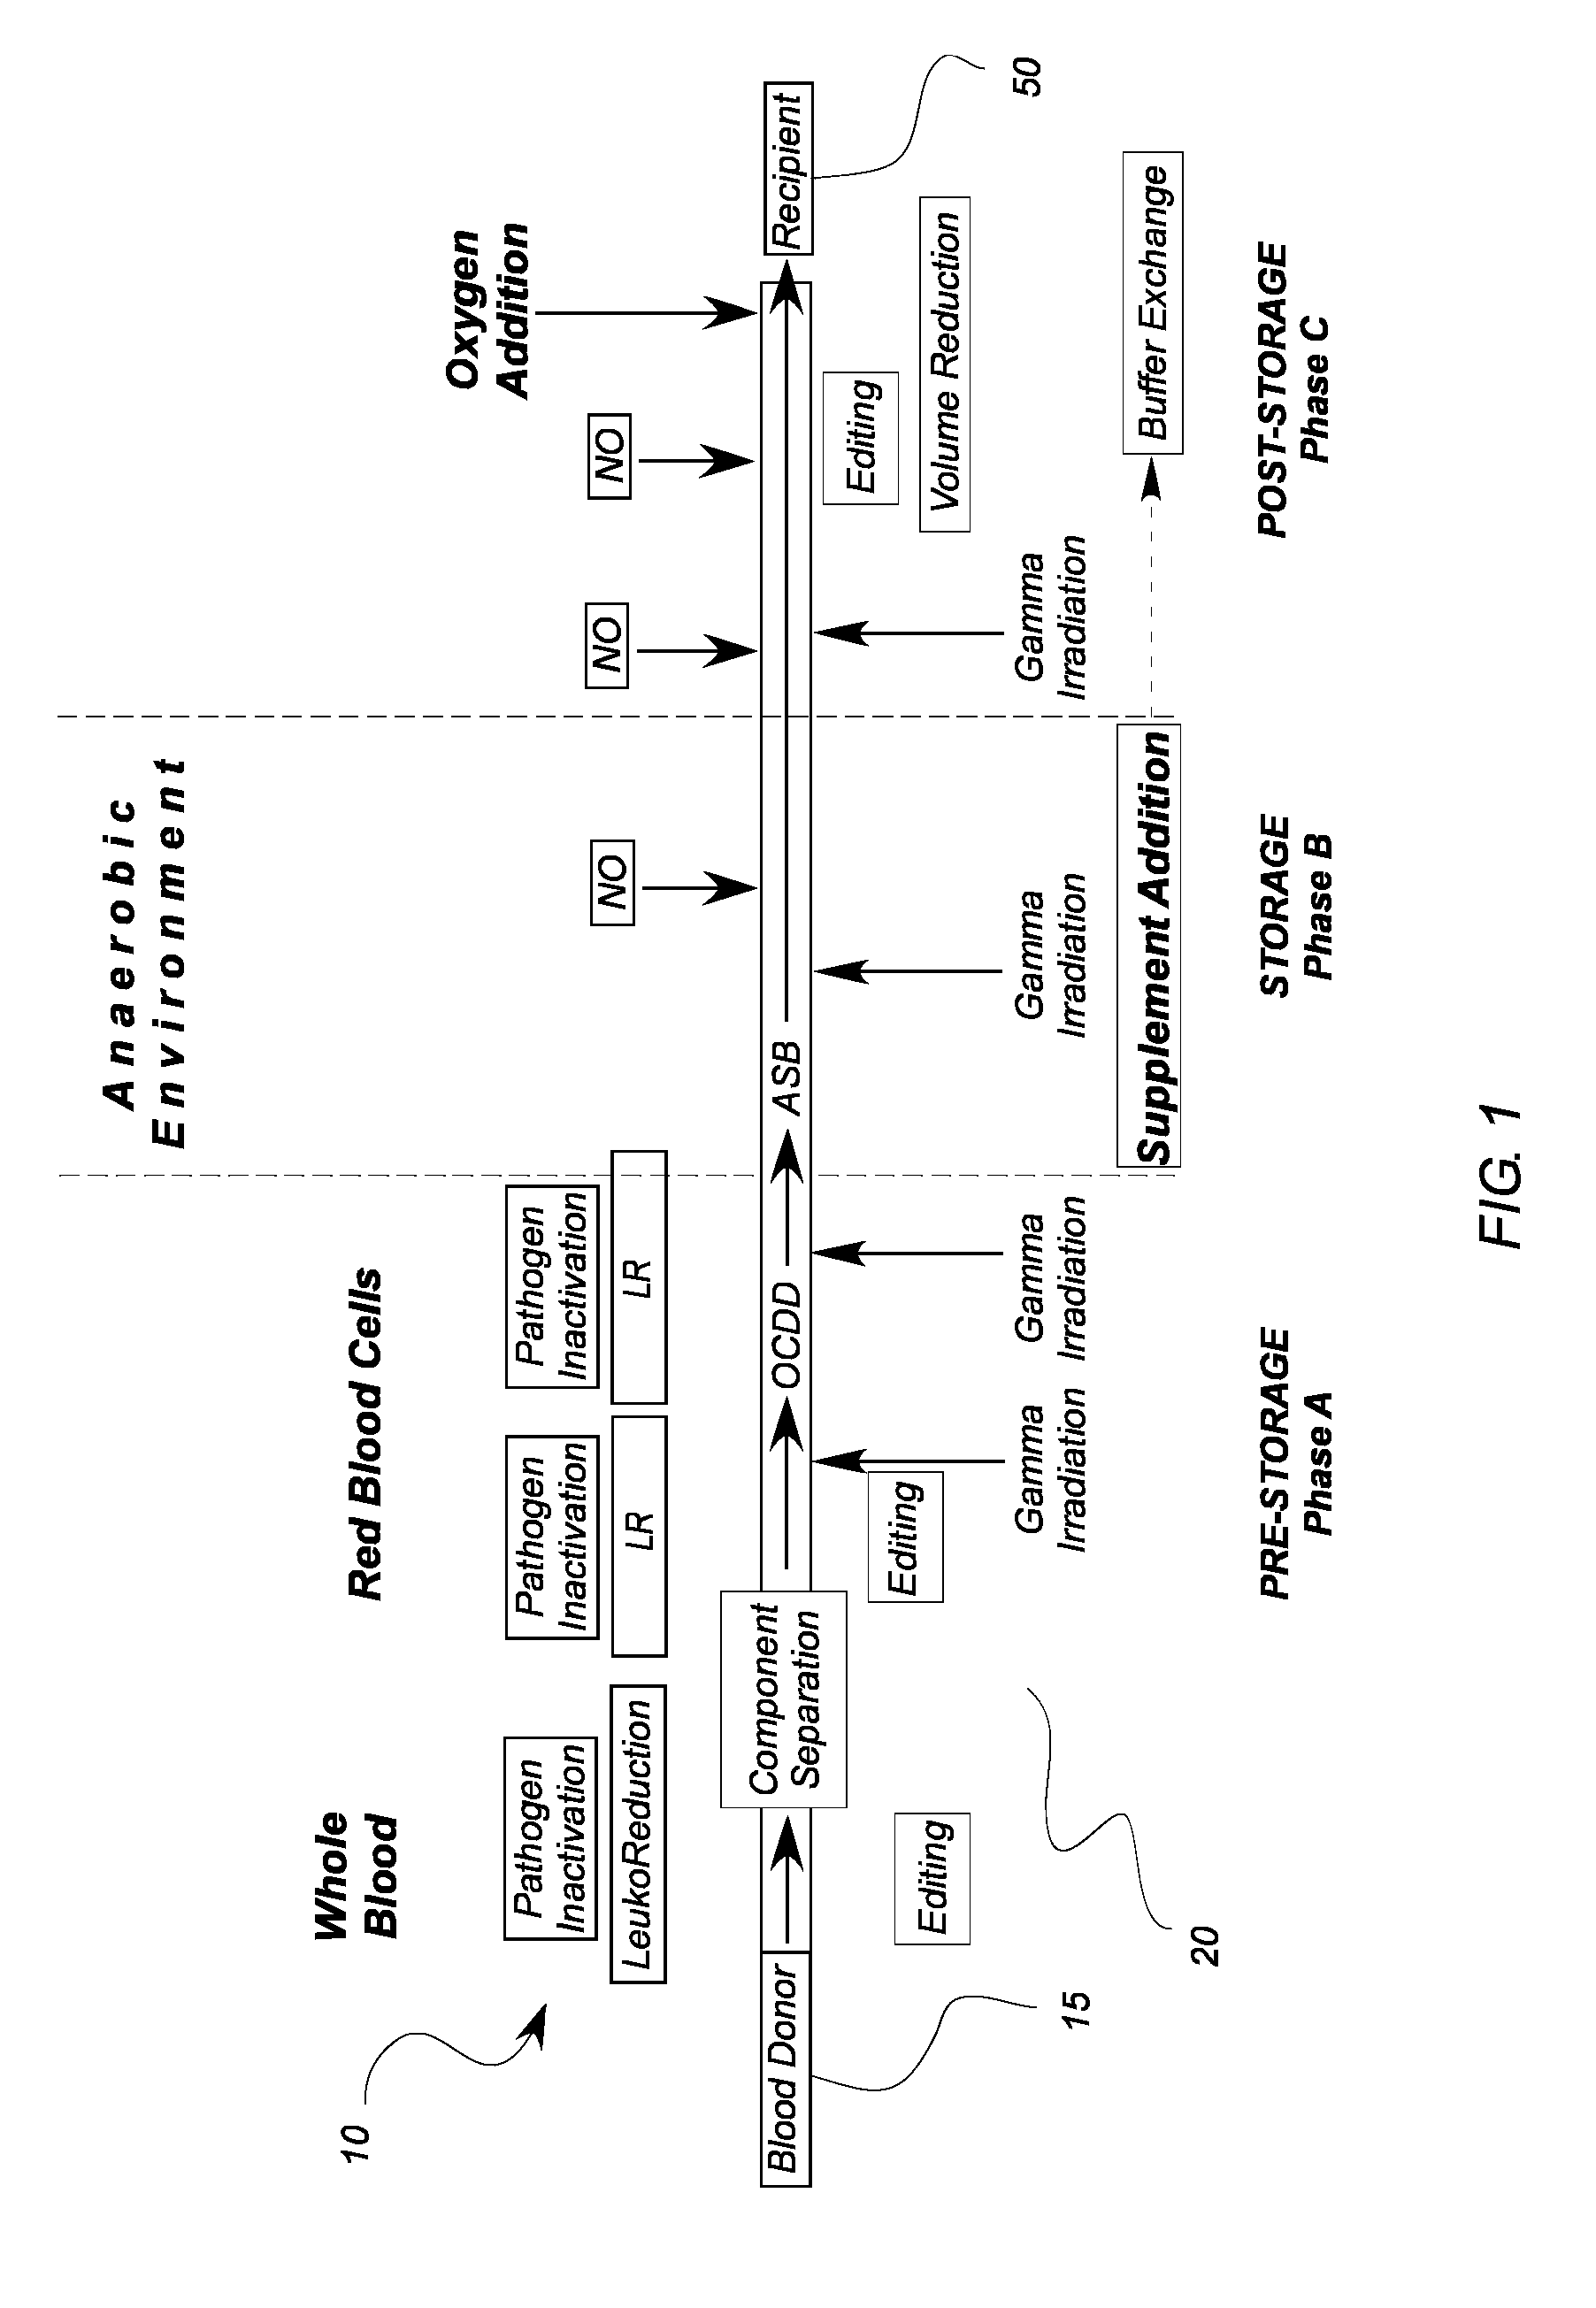 System for extended storage of red blood cells and methods of use